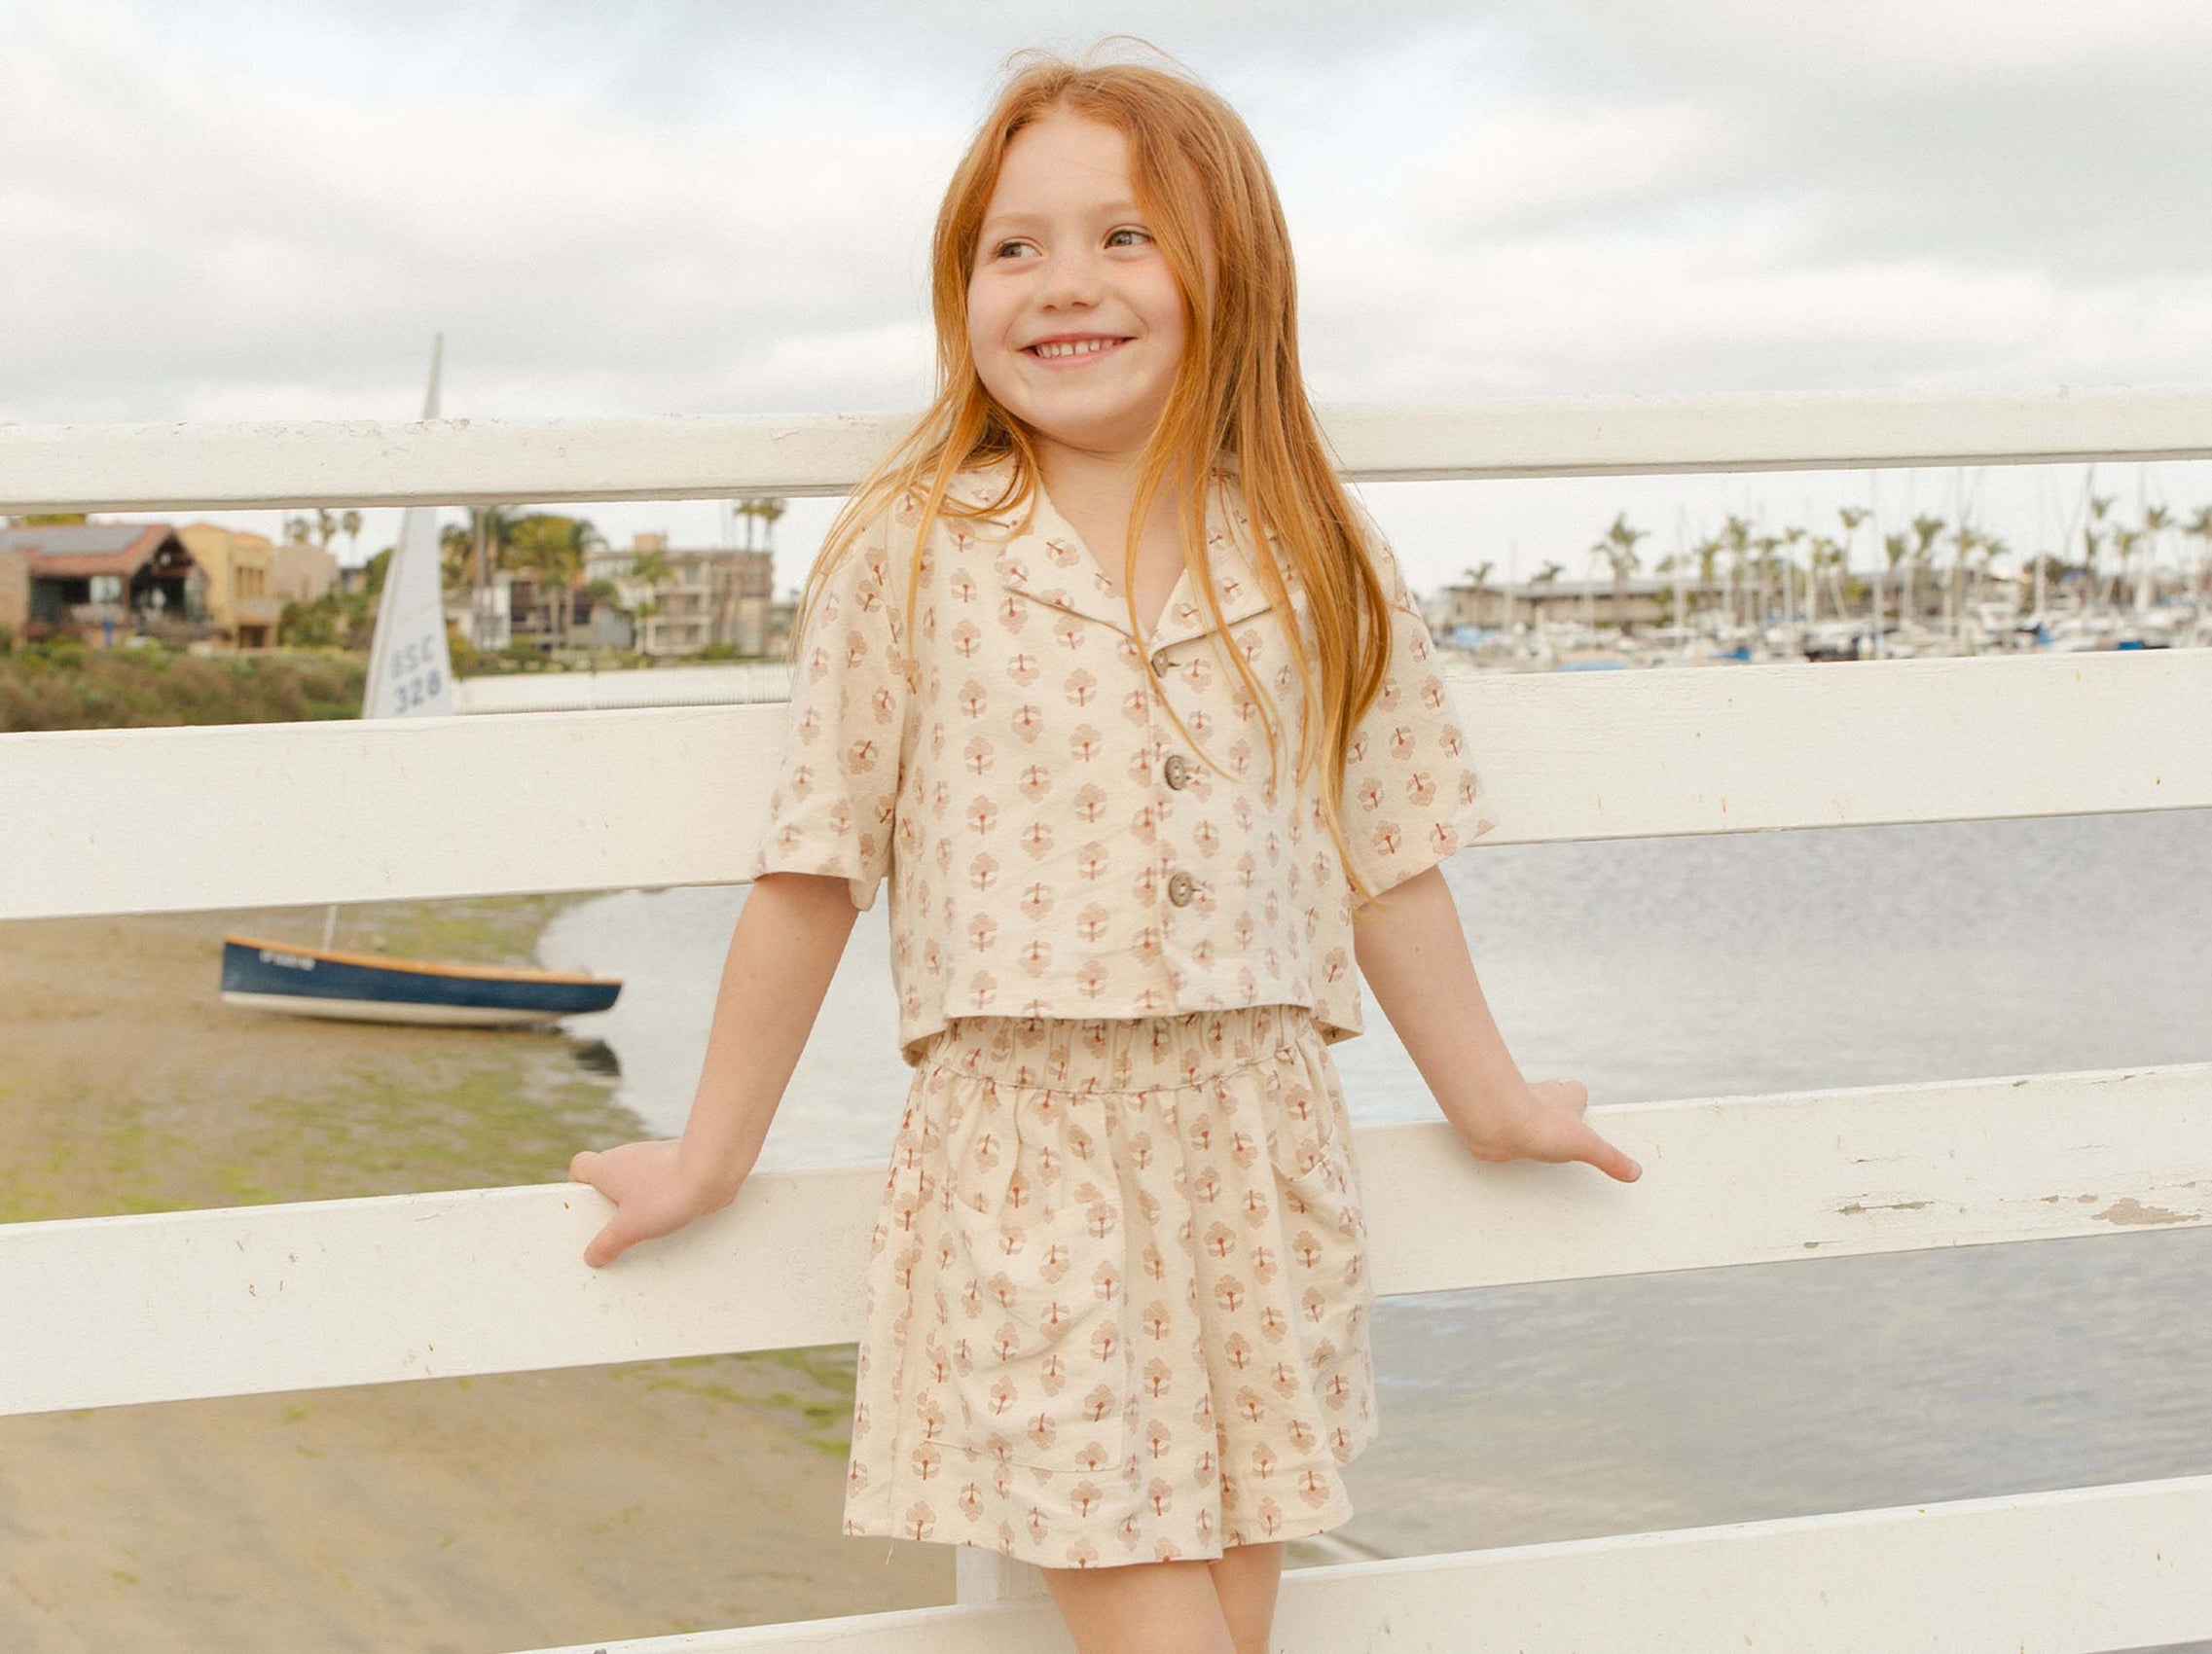 Young girl with red hair smiling and leaning on a white fence by a marina with boats and overcast sky in the background.